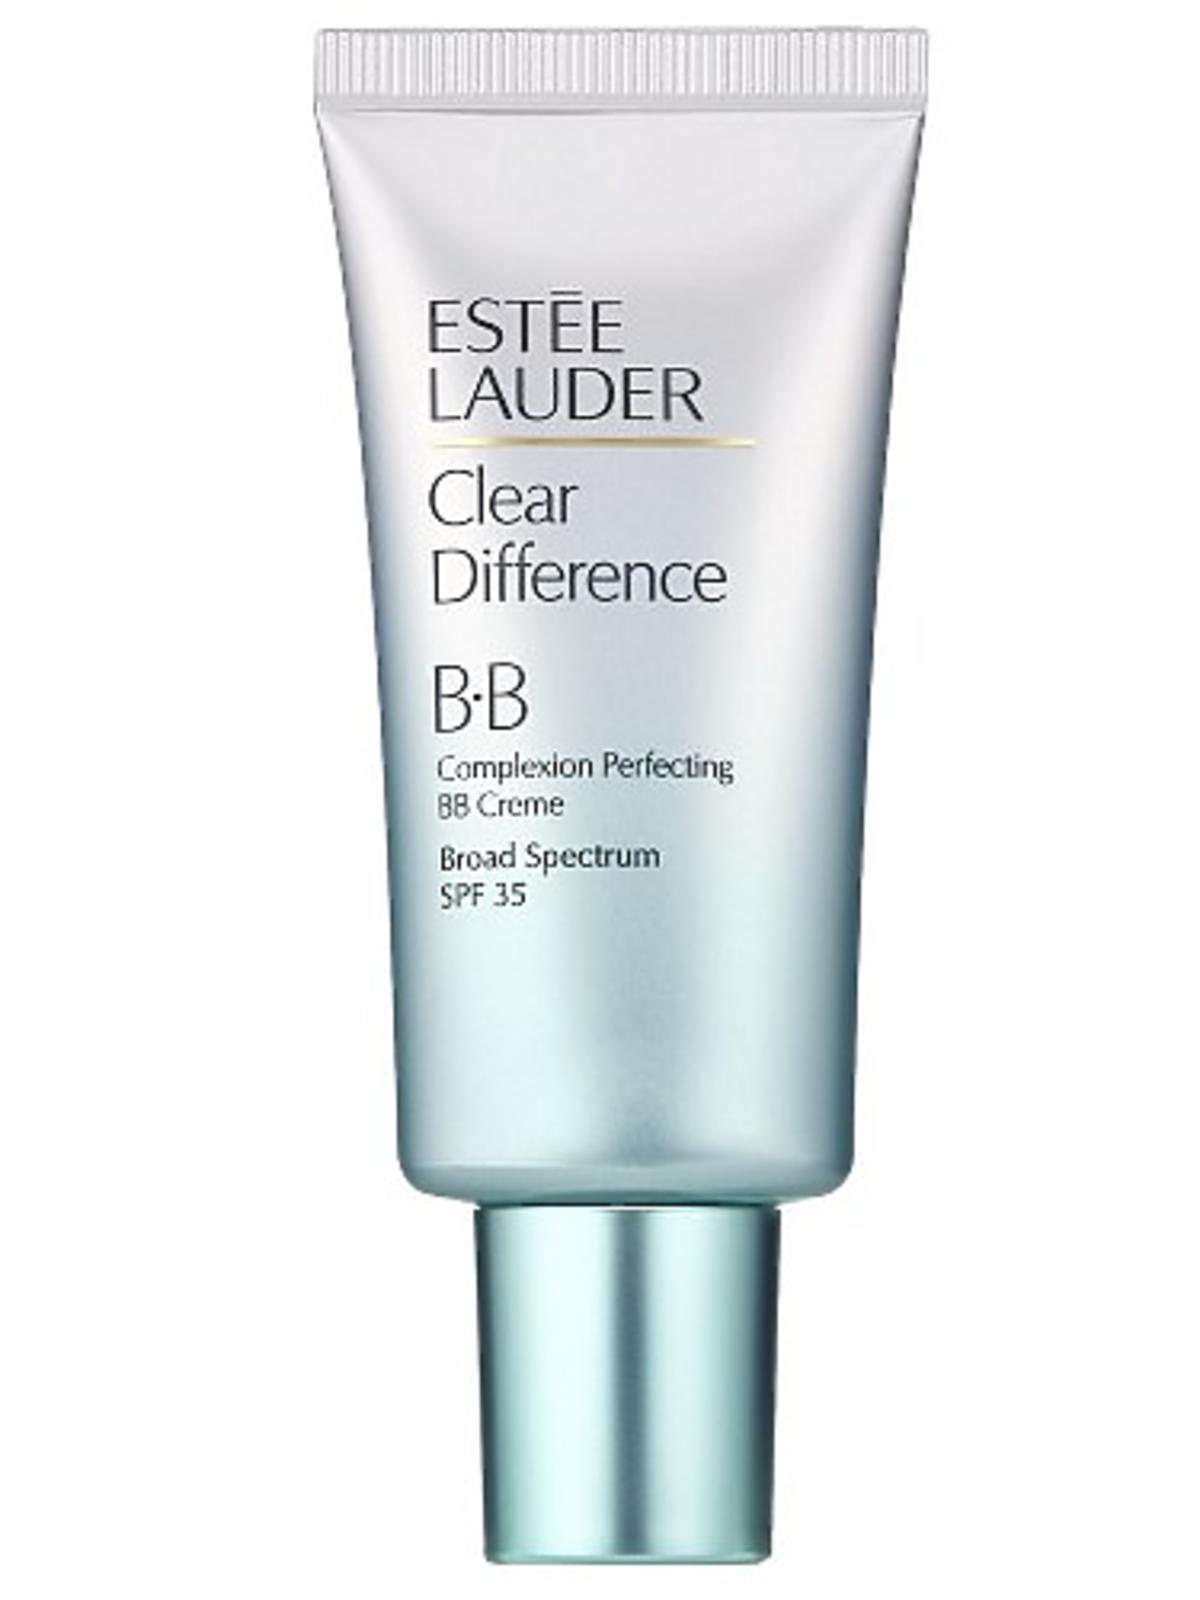 Krem BB Clear Difference Complexion Perfecting BB Creme Estee Lauder, 160zł